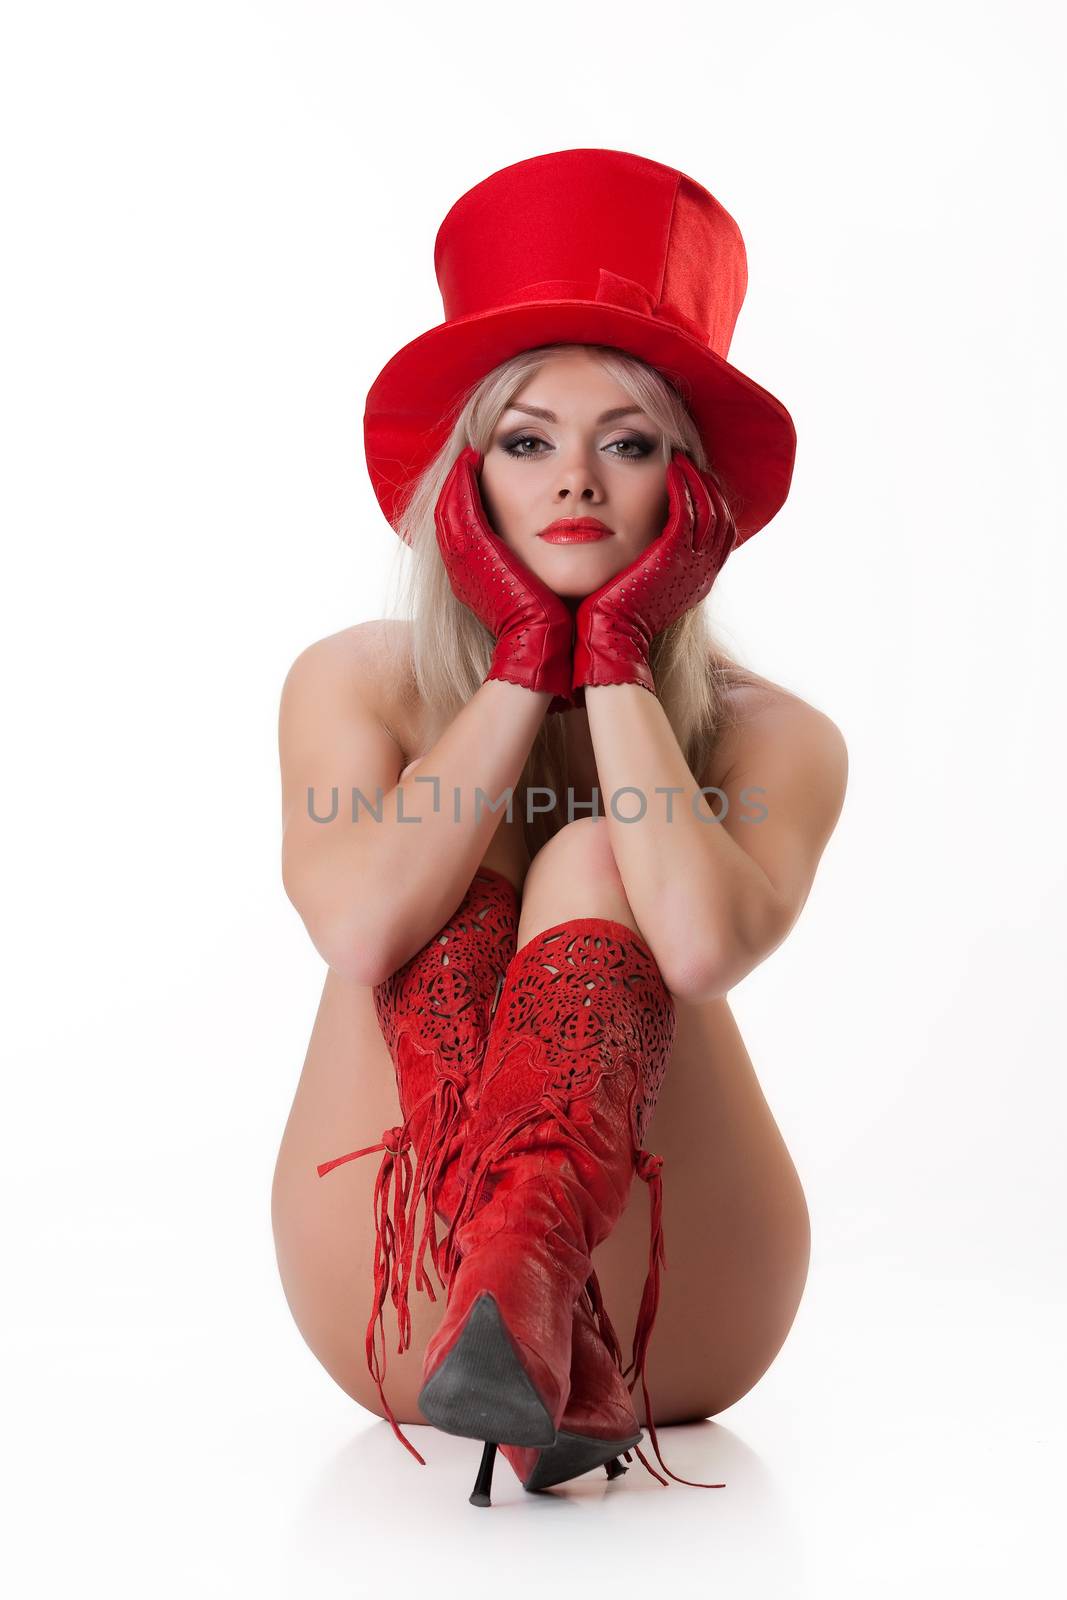 Young nude woman in red boots on isolated background